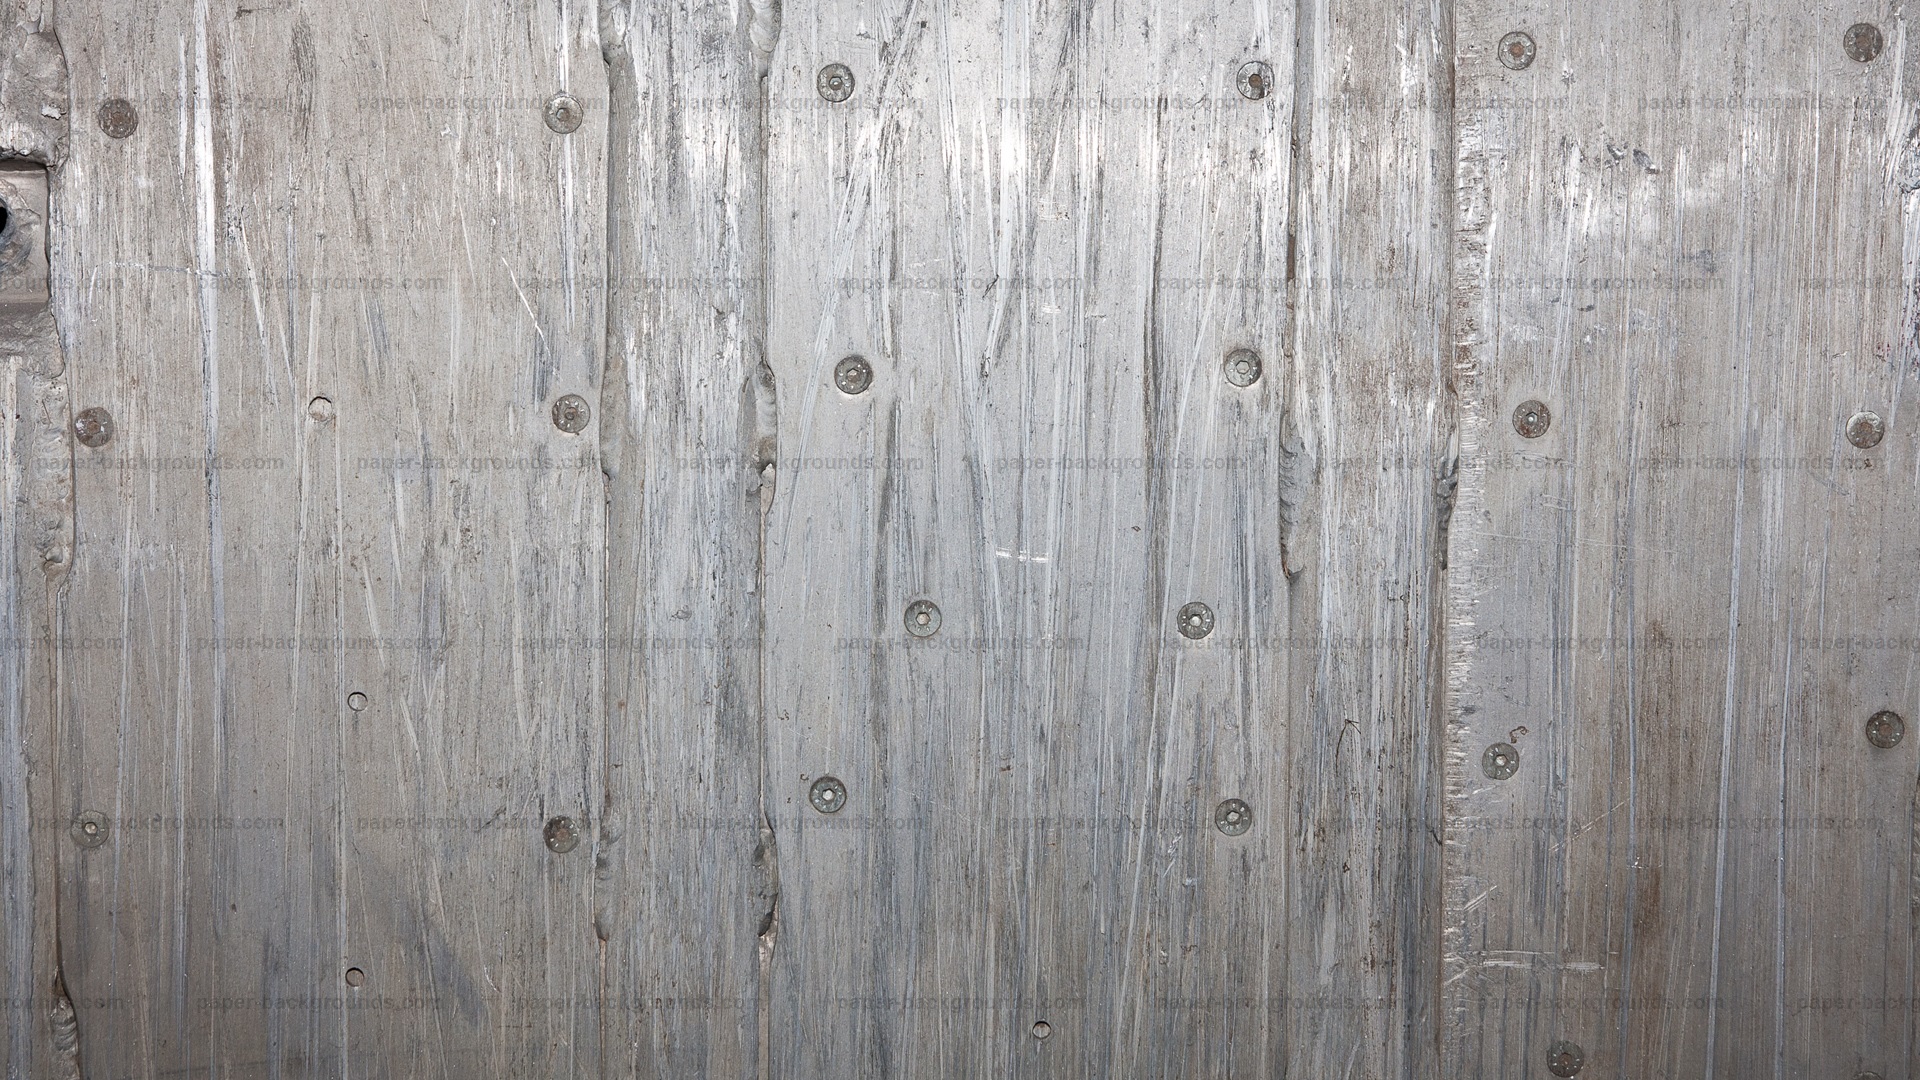 Paper Backgrounds | scratched-metal-plate-texture-hd